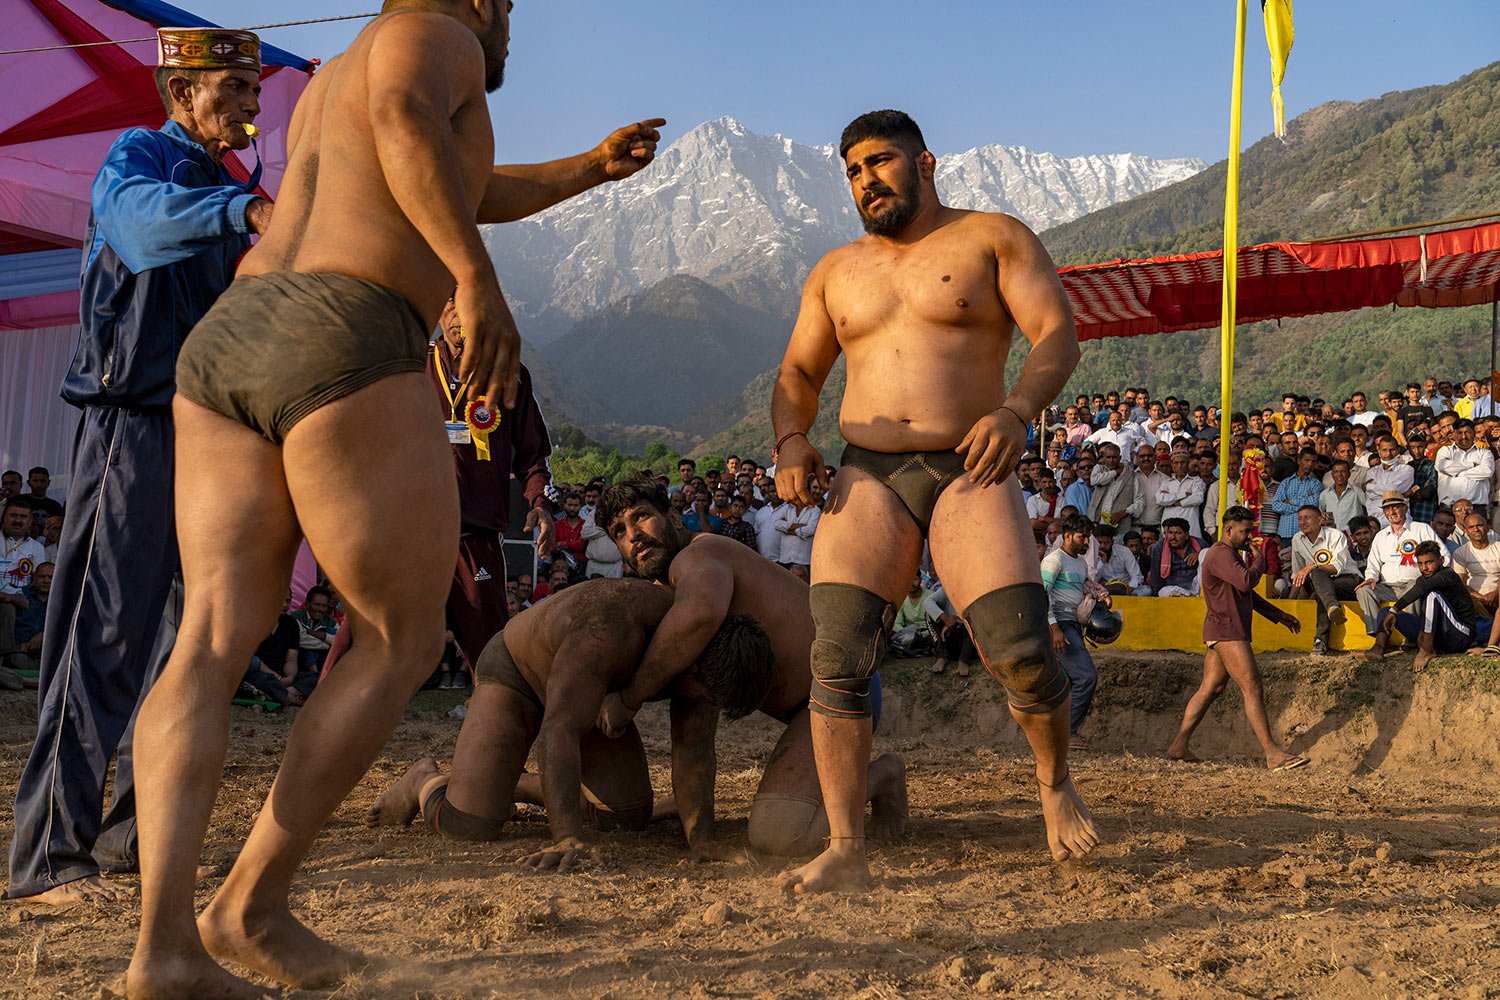  A wrestler points his finger at another as they compete for a cash prize at a local fair in Dharmsala, India, Tuesday, March 29, 2022.  (AP Photo/Ashwini Bhatia) 